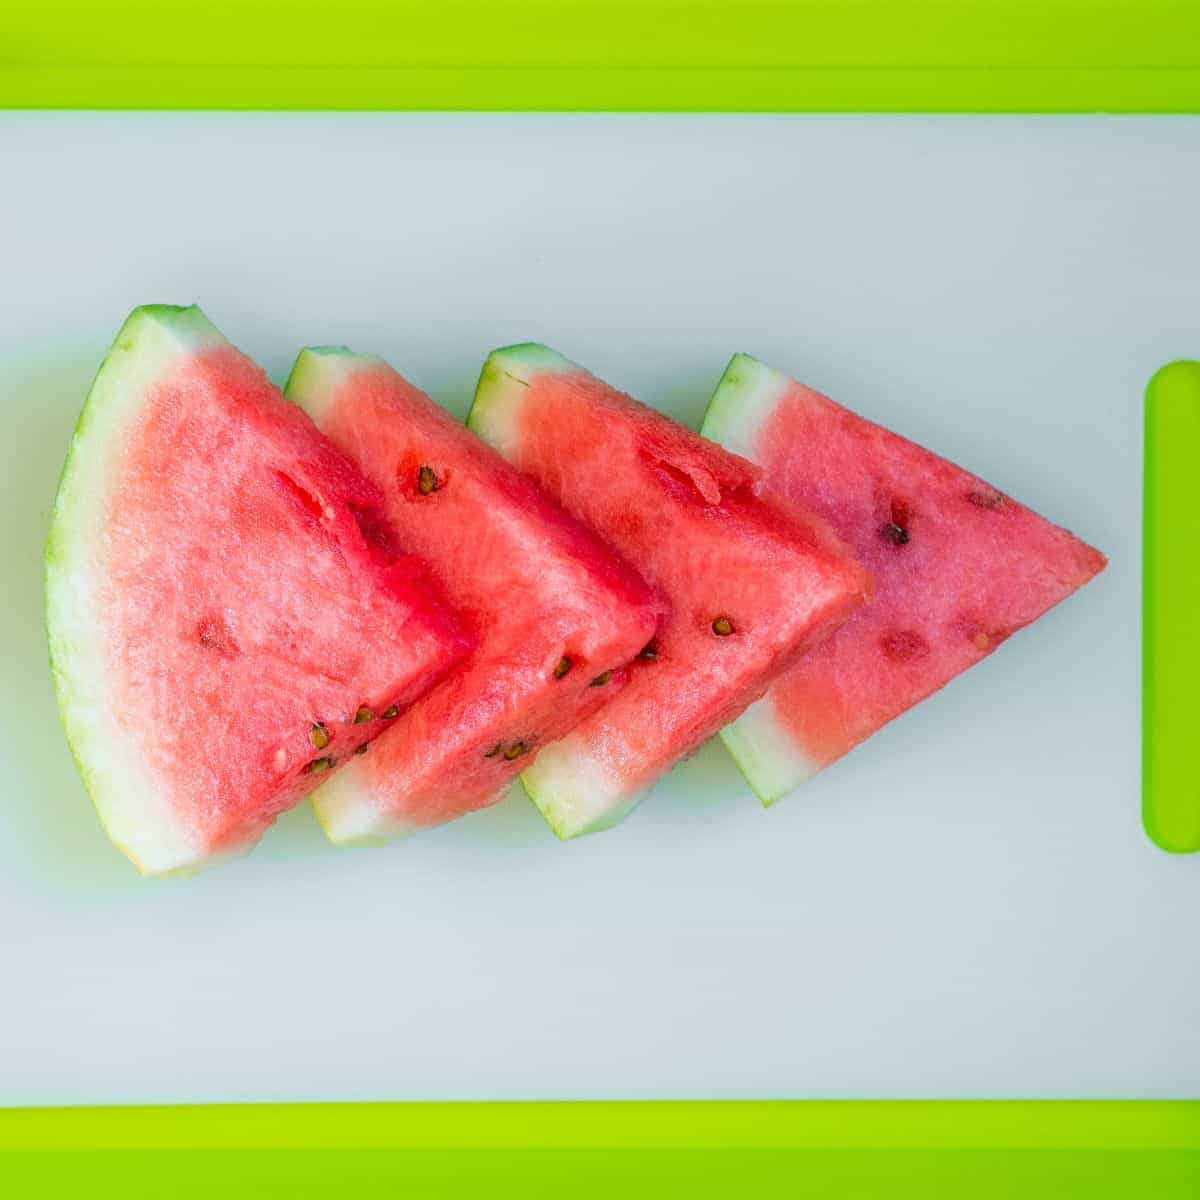 Discover the benefits of watermelon for kids and 7 fun and easy ways to serve watermelon to kids that will have them gobbling it up! 